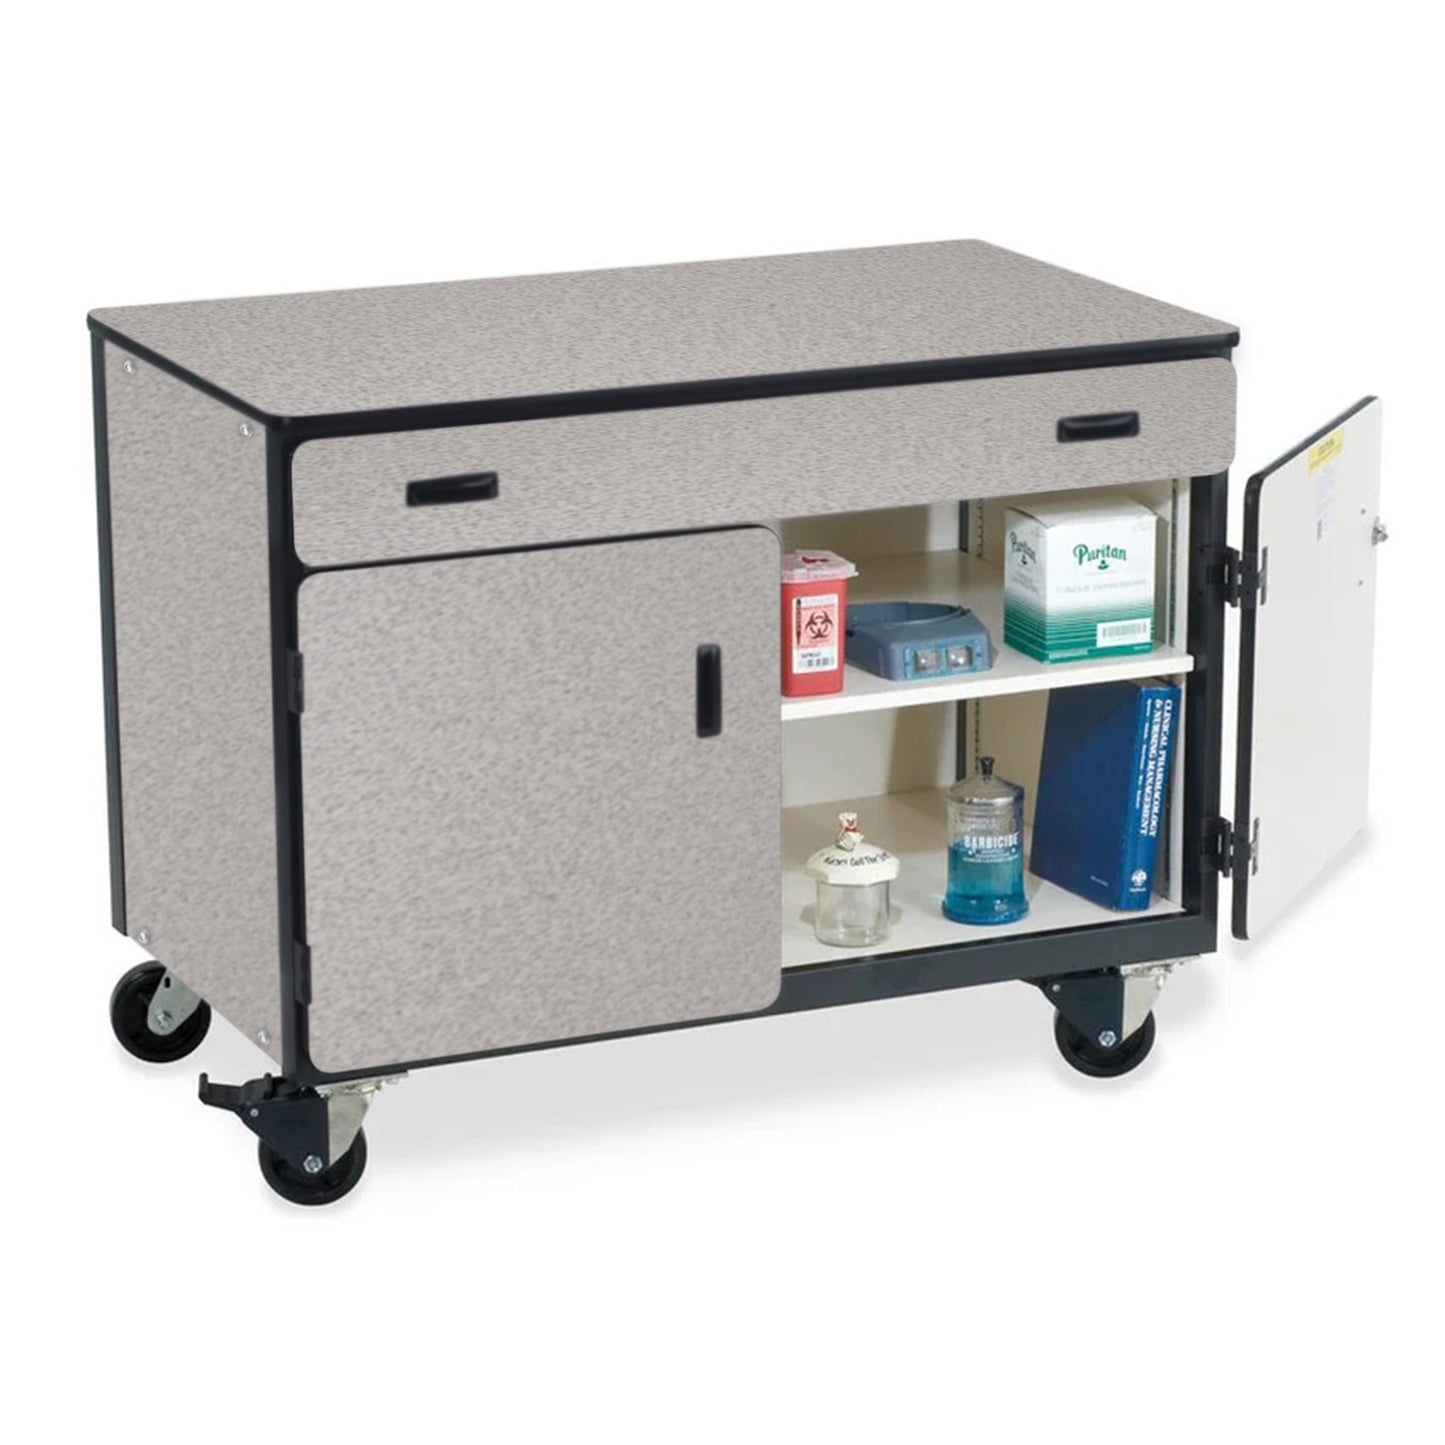 Virco 2321MMB - Mobile Storage Cabinet With One Paper Drawer, One Adjustable Steel Shelf, Two Hinged Doors, Magnetic Marker Back - 48"W x 28"D x 36"H (Virco 2321MMB)